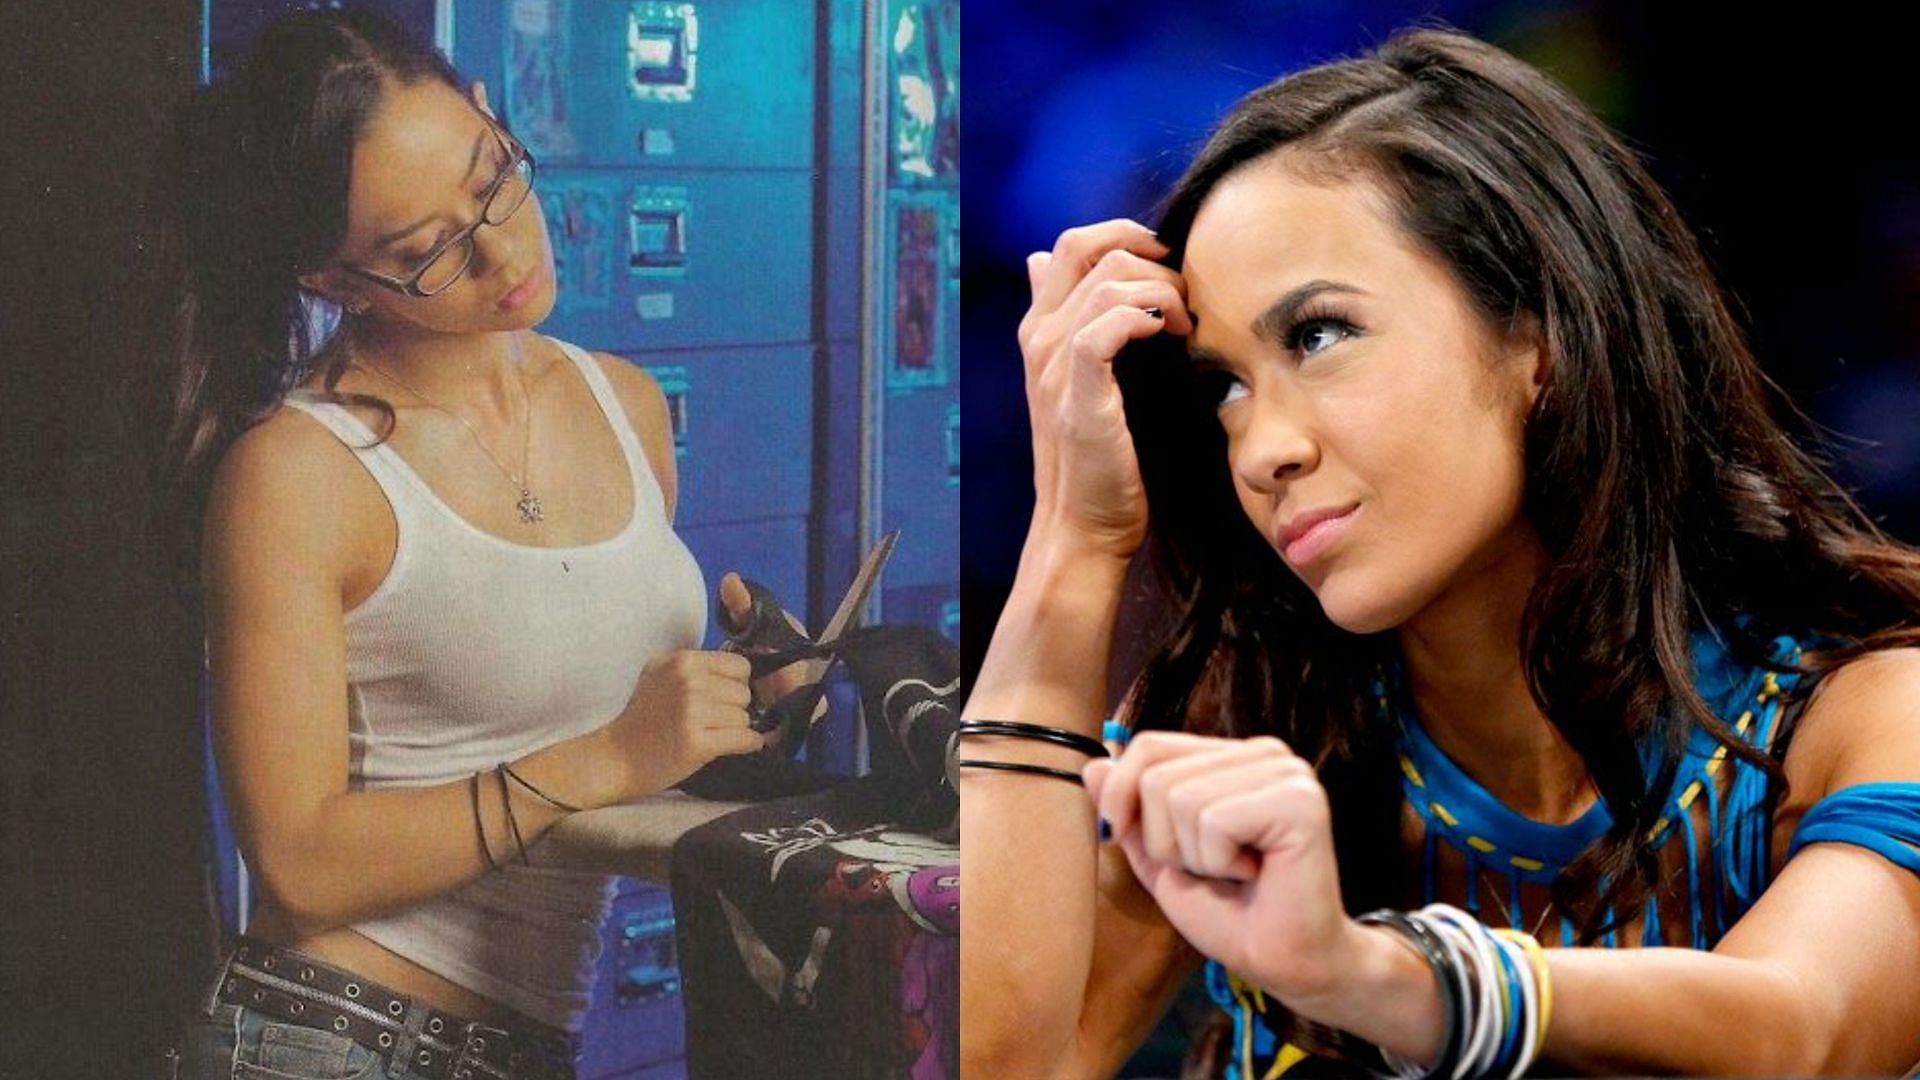 AJ Lee left WWE and retired from in-ring competition in 2015 